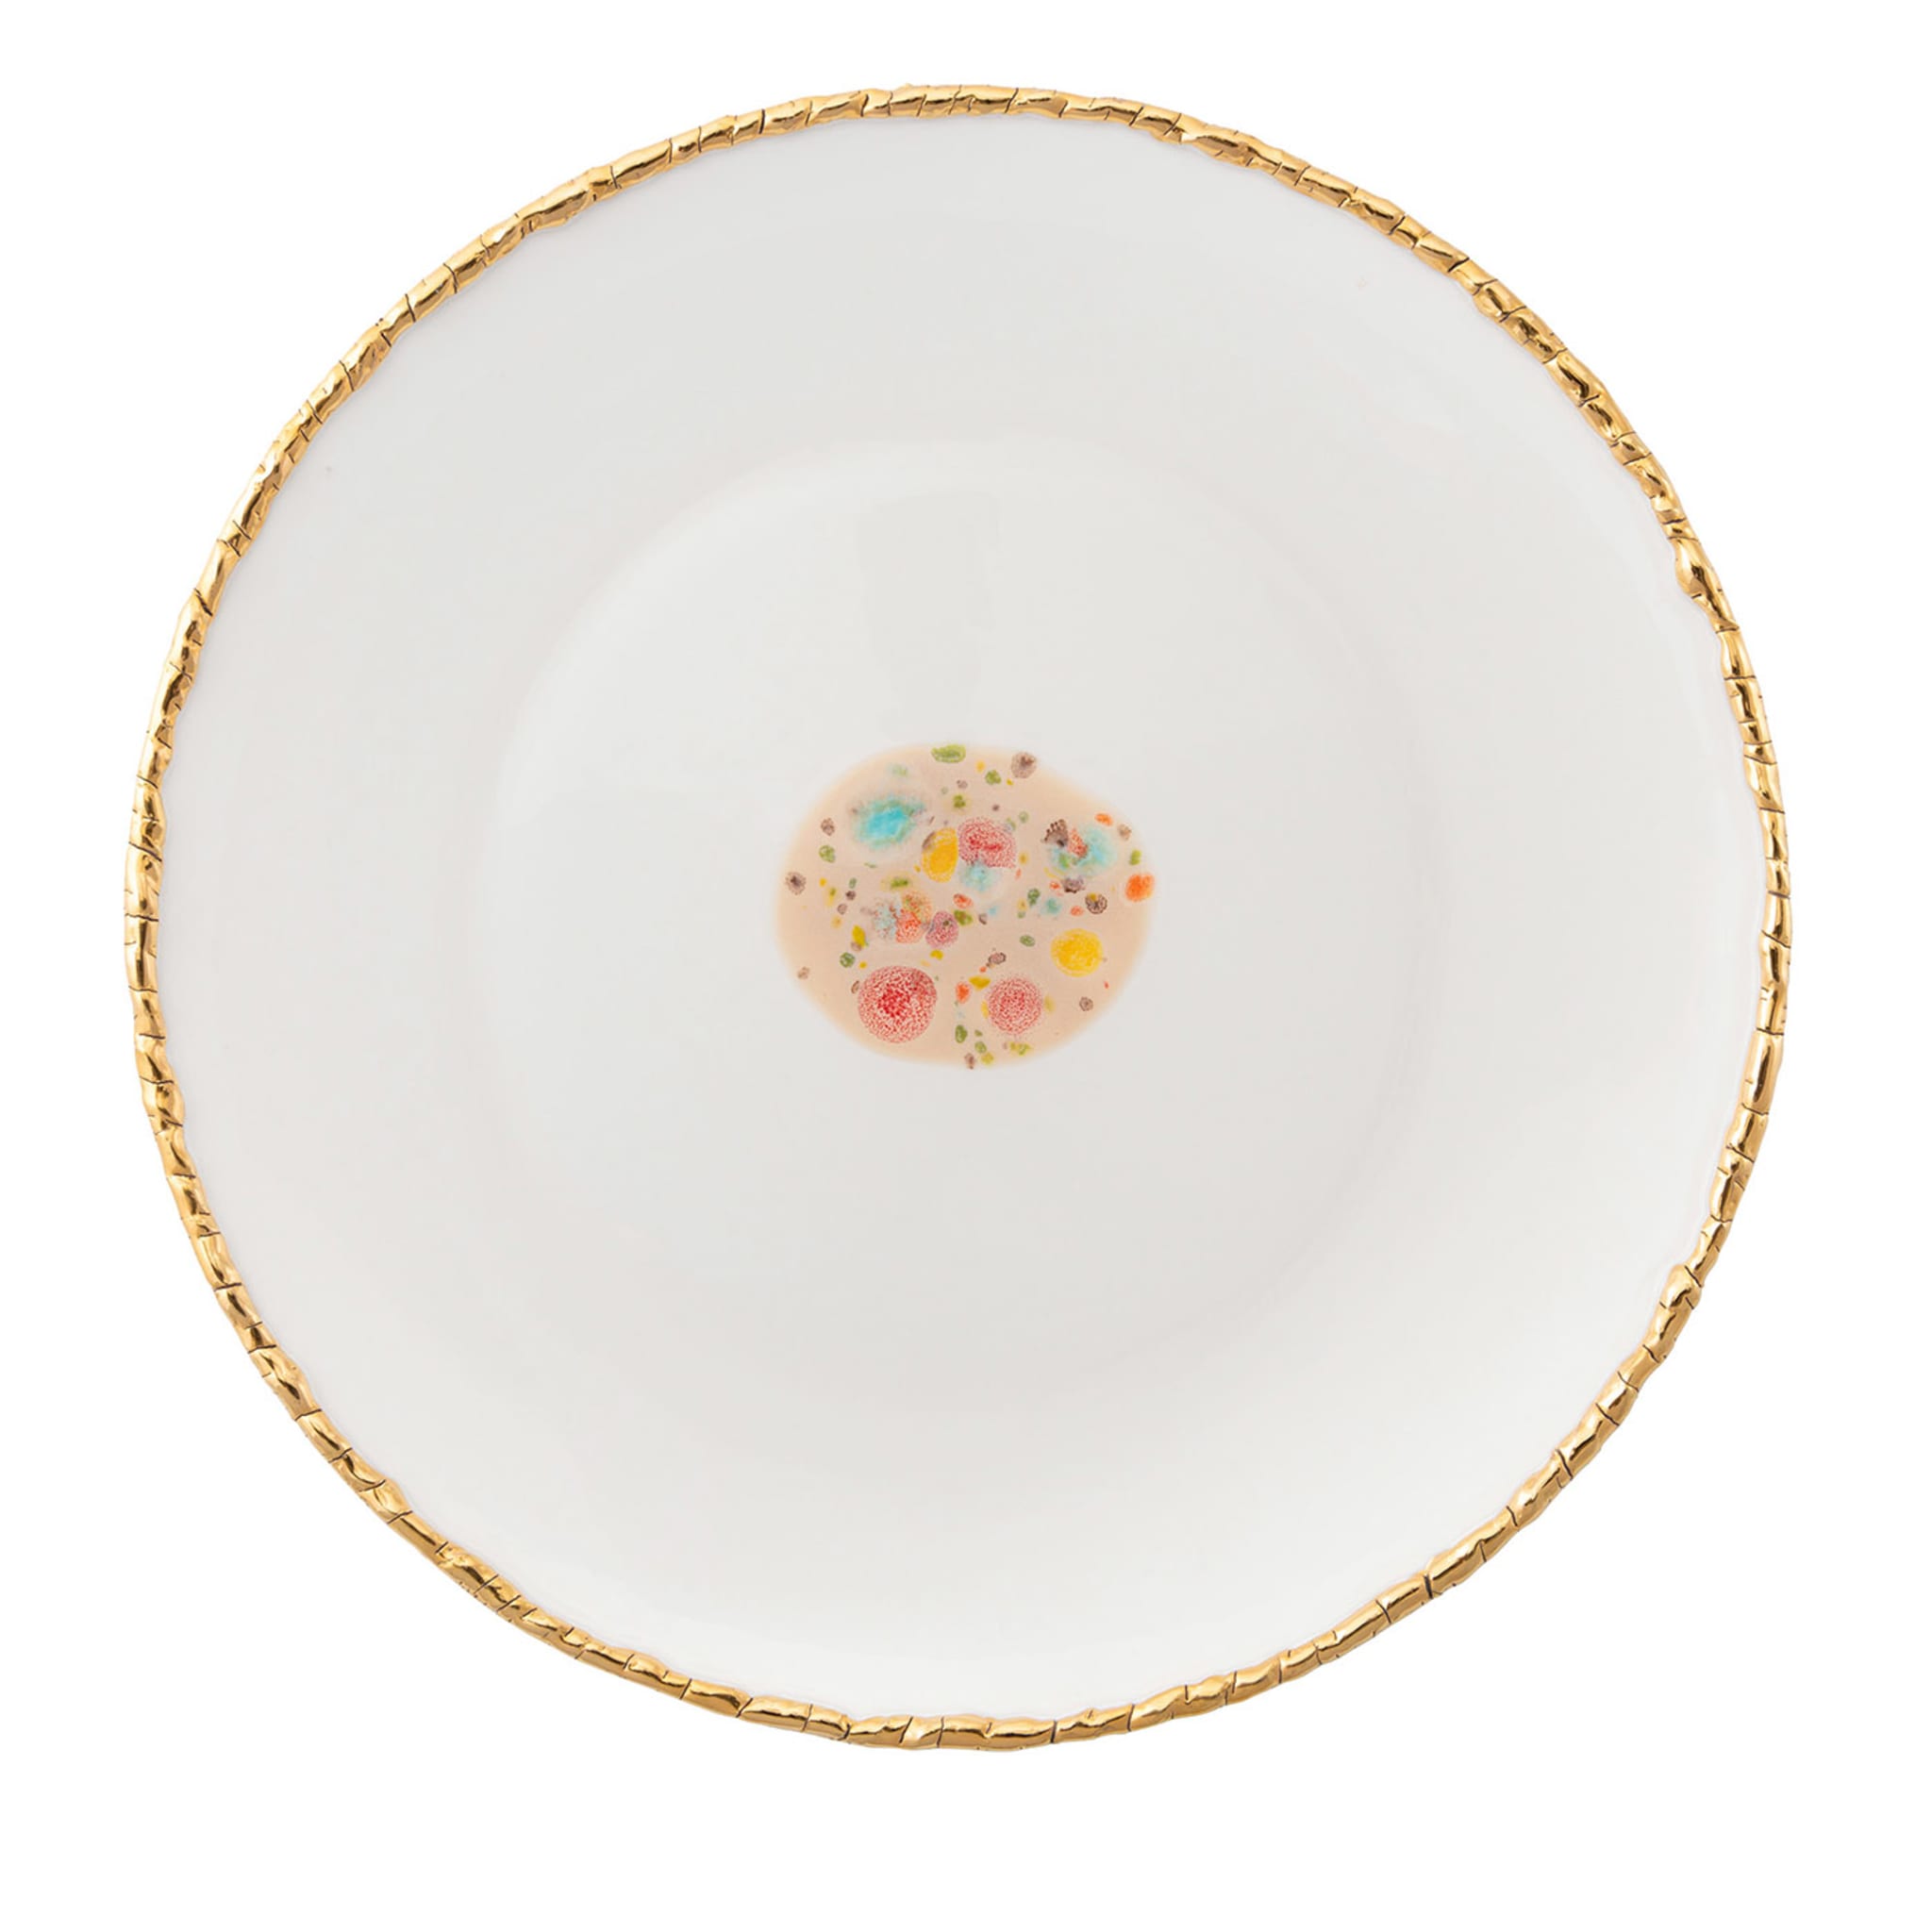 Piazza del Popolo Set of 2 Dinner Coupe Plates #1 - Main view